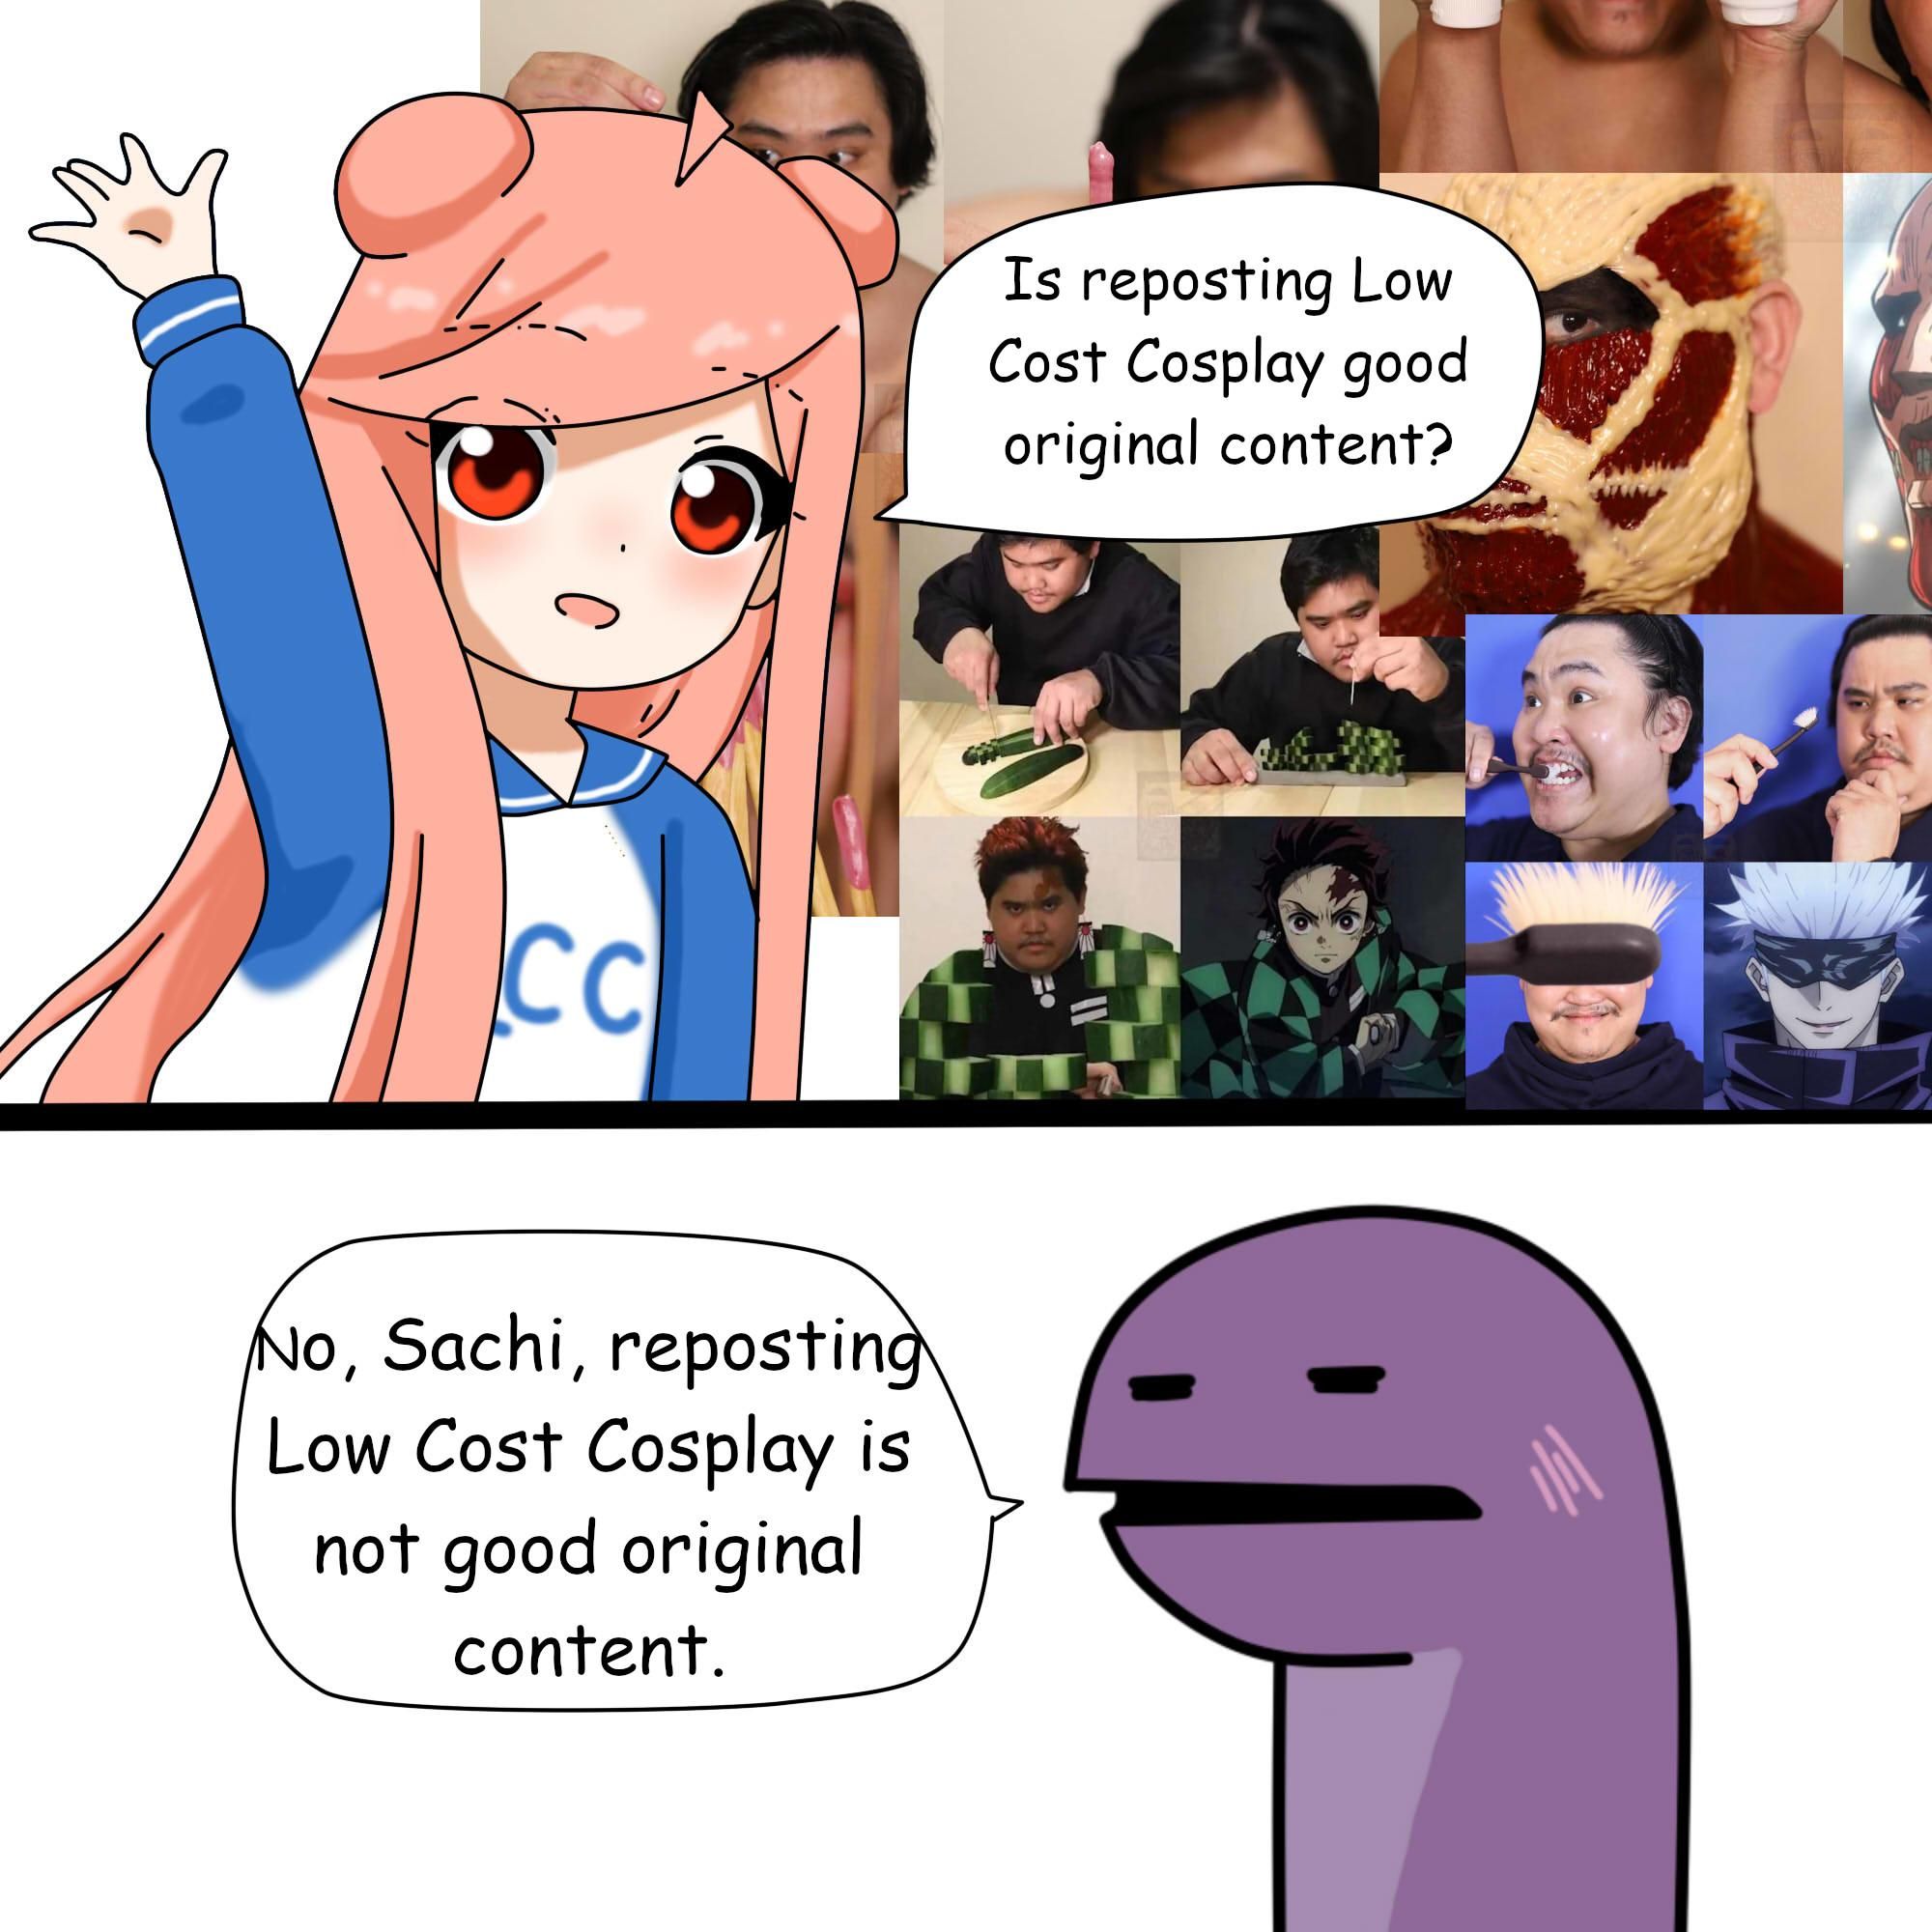 Low Cost Cosplay is funny, reposters are not